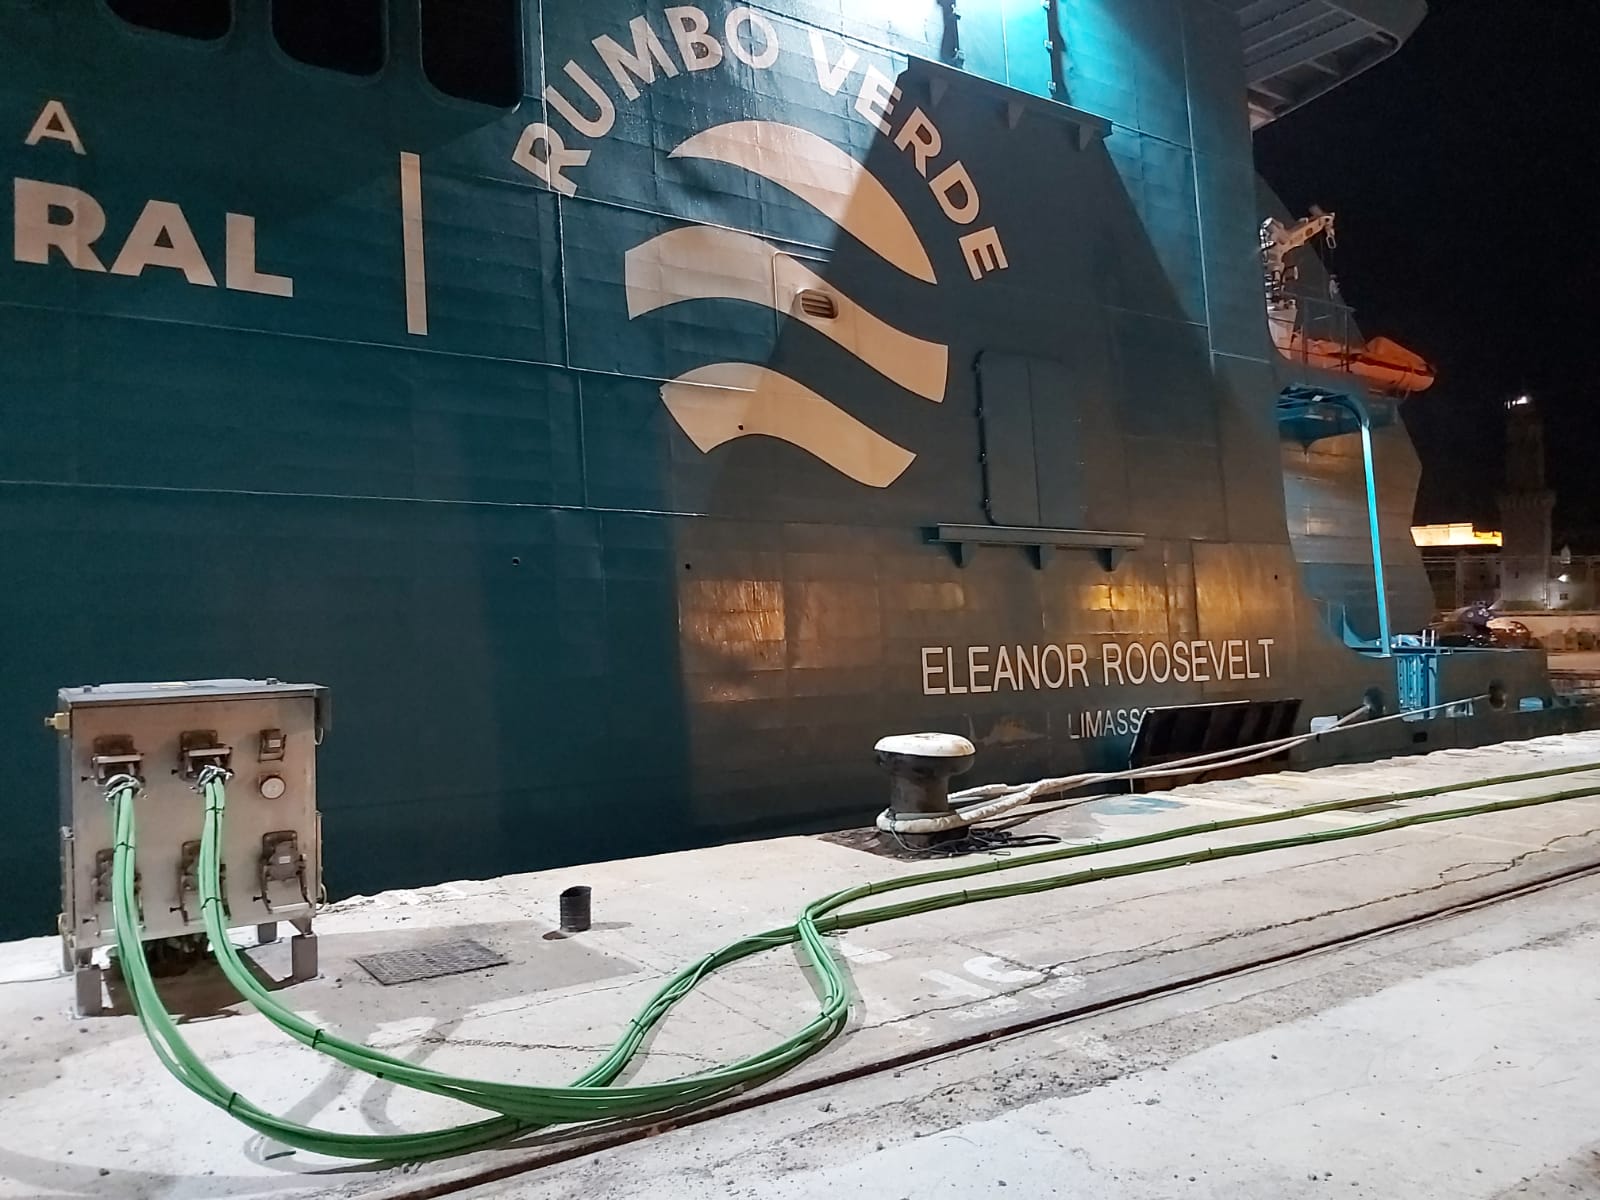 Tests begin on the on-shore power connection system for ferries in the port of Palma